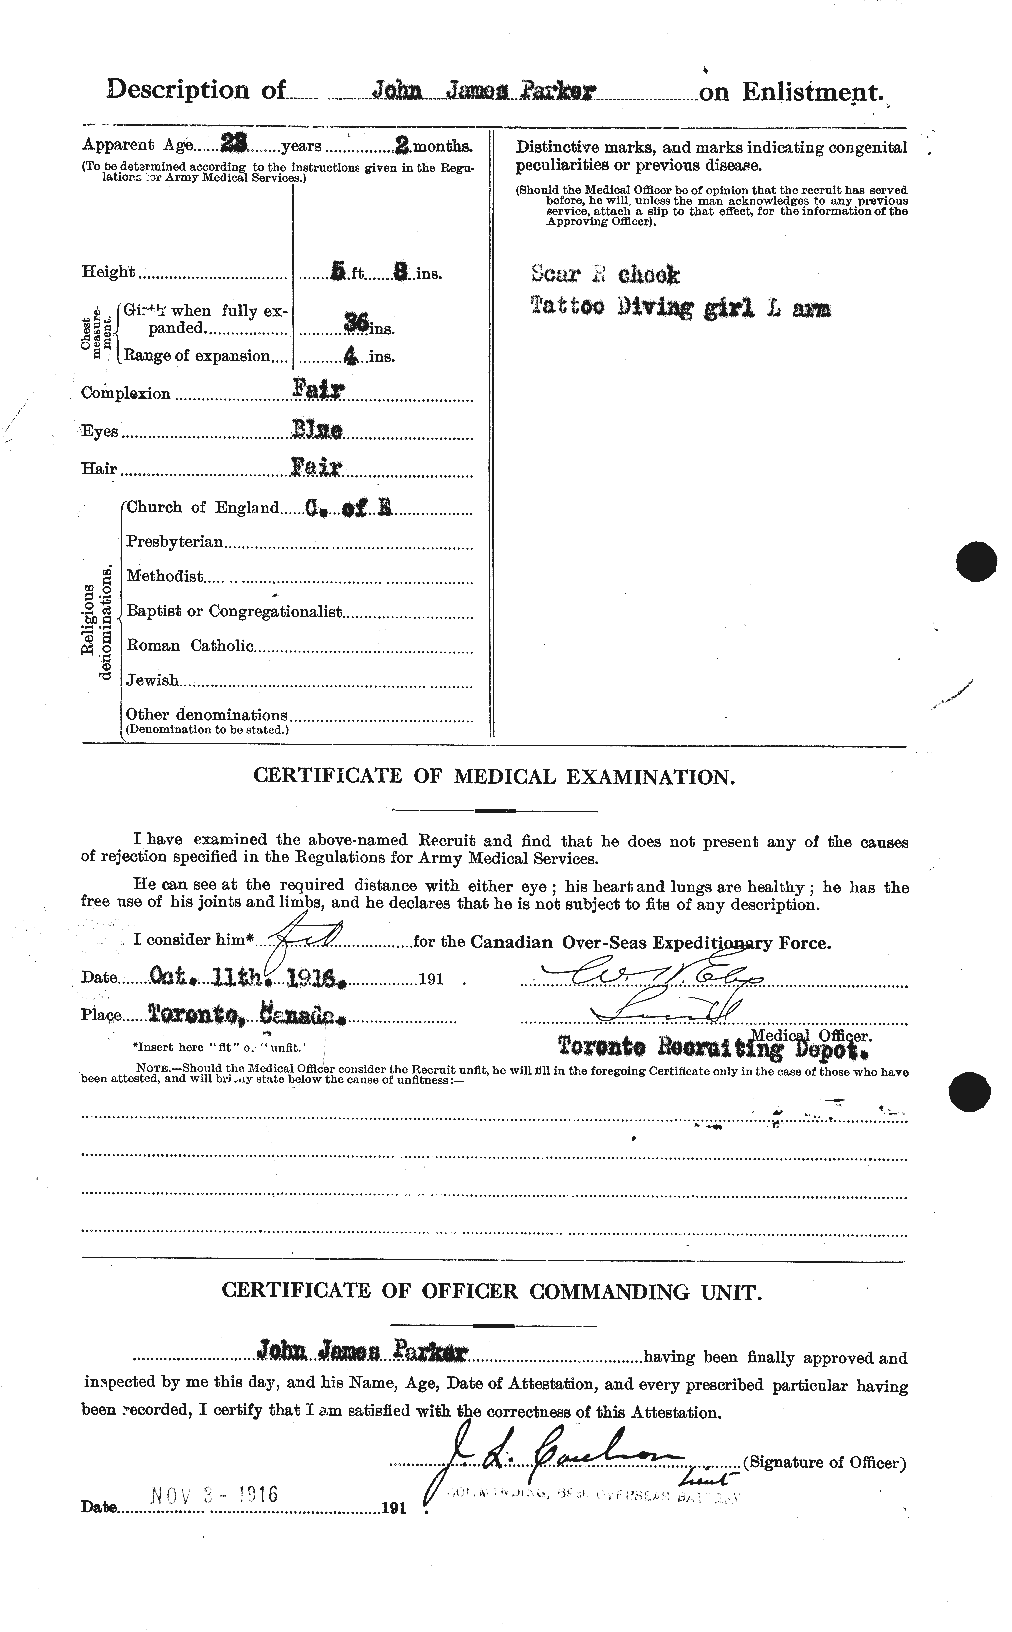 Personnel Records of the First World War - CEF 565479b